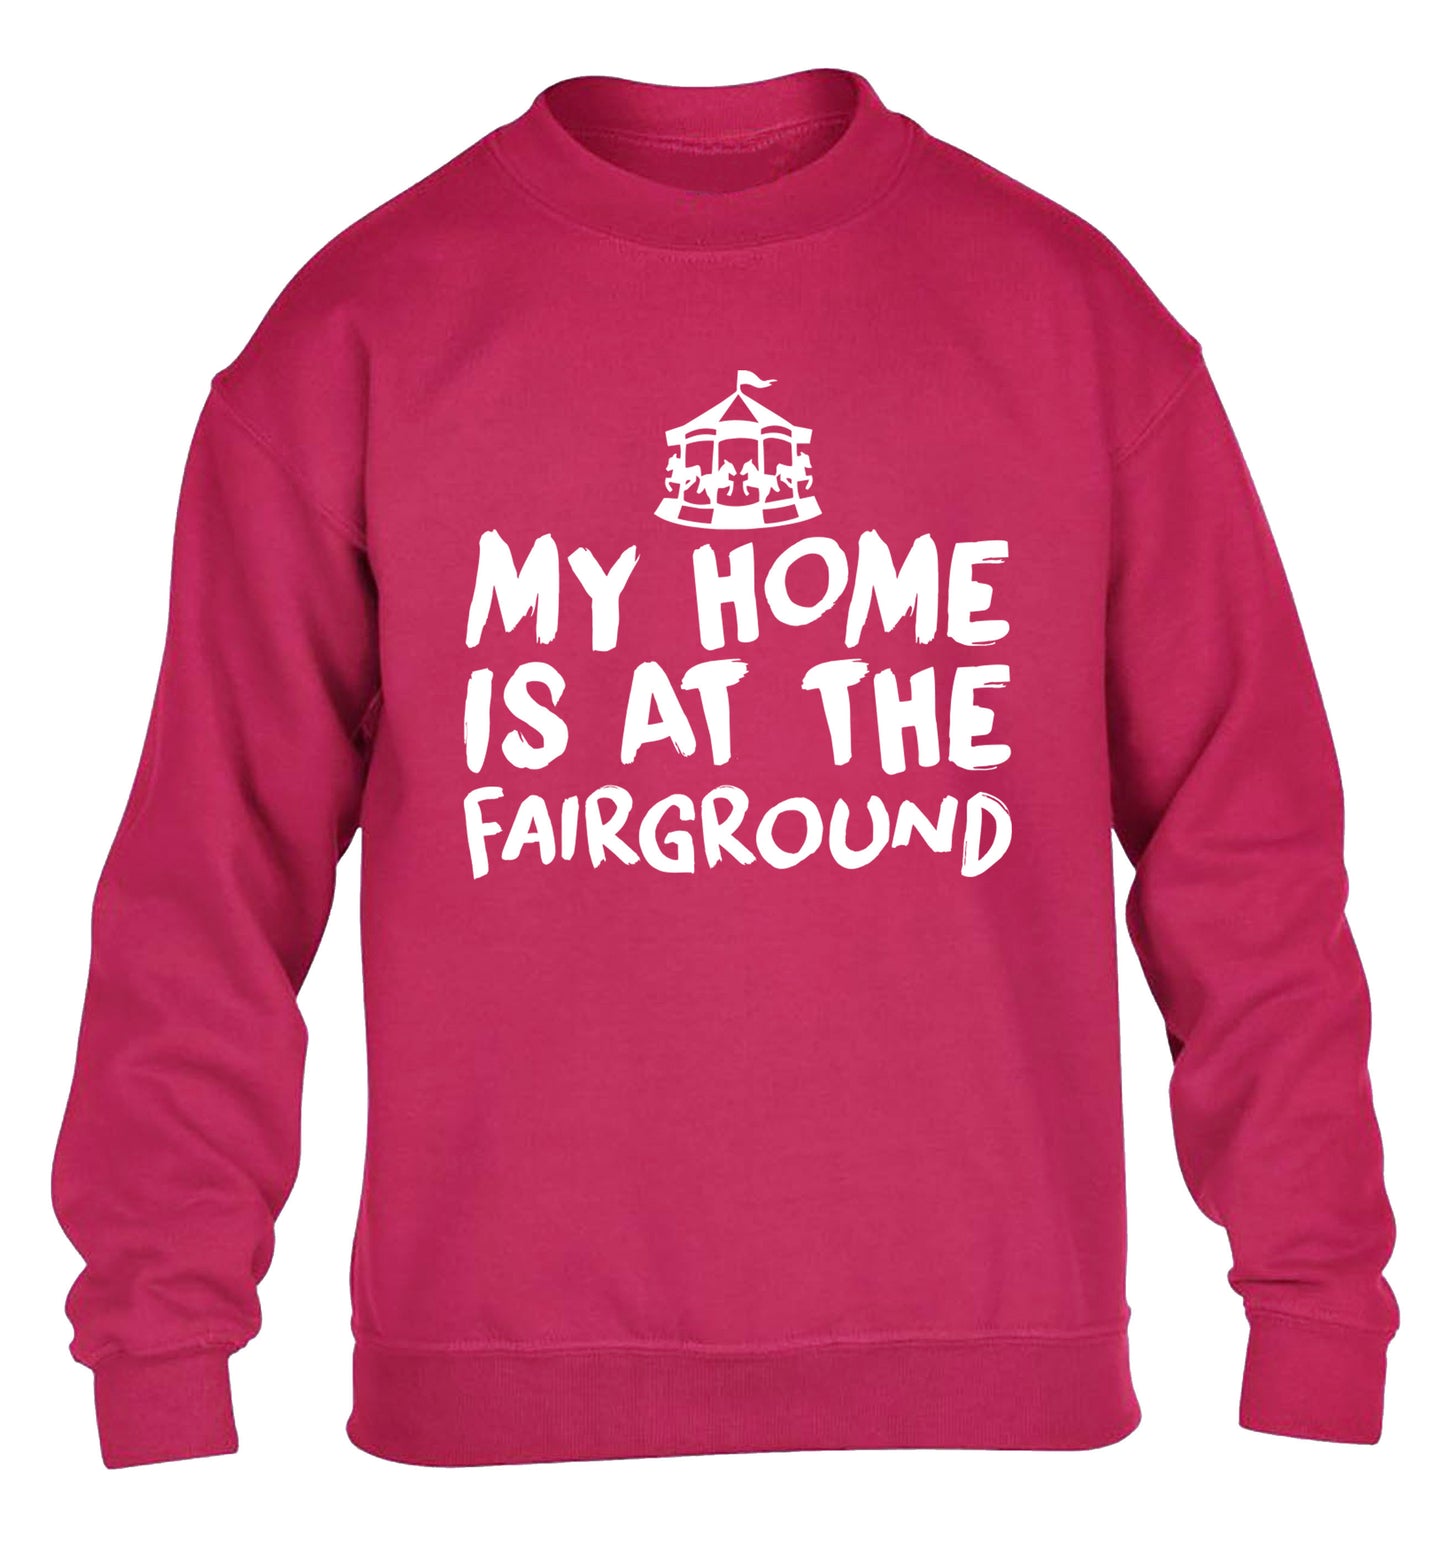 My home is at the fairground children's pink sweater 12-14 Years